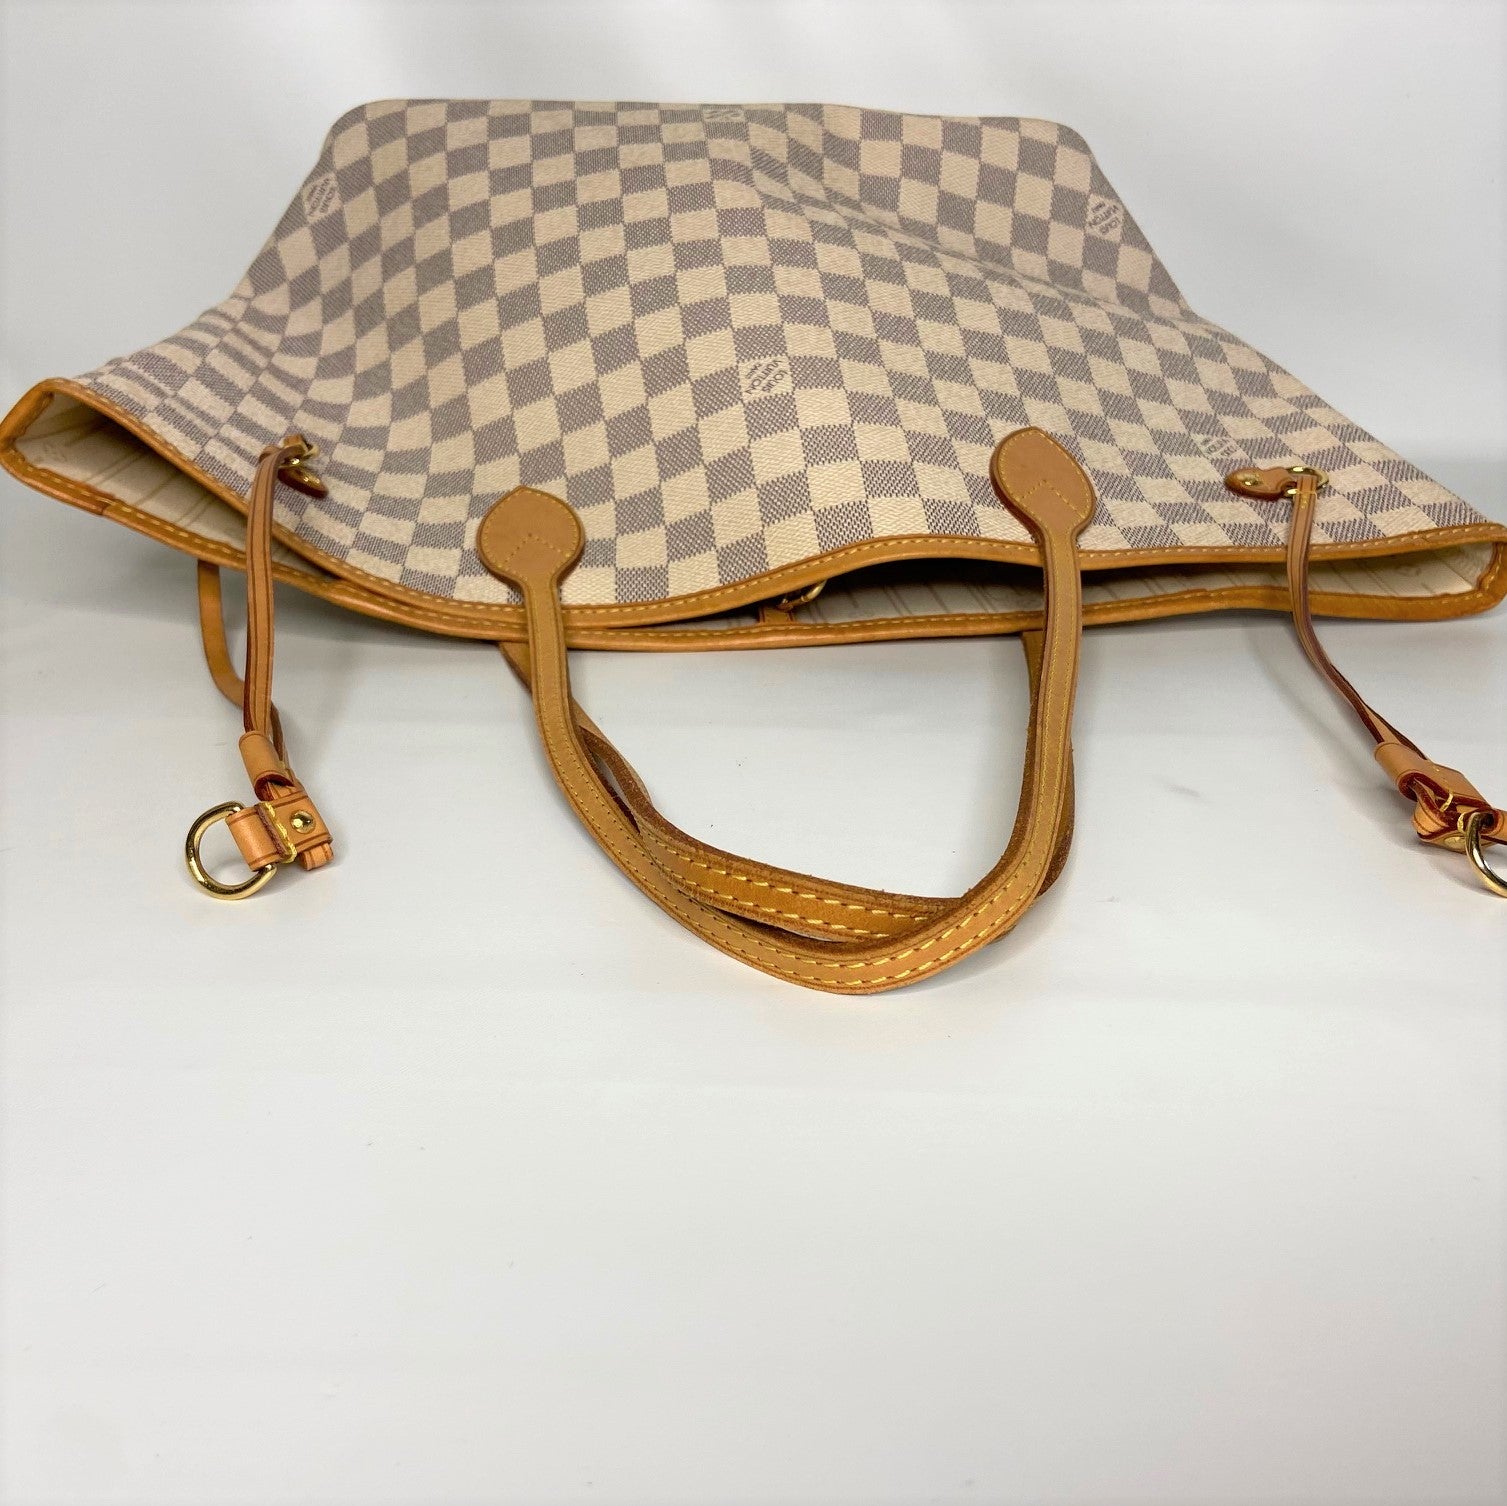 Authentic Louis Vuitton Neverfull MM  Louis vuitton neverfull mm, Louis  vuitton, Louis vuitton bag neverfull